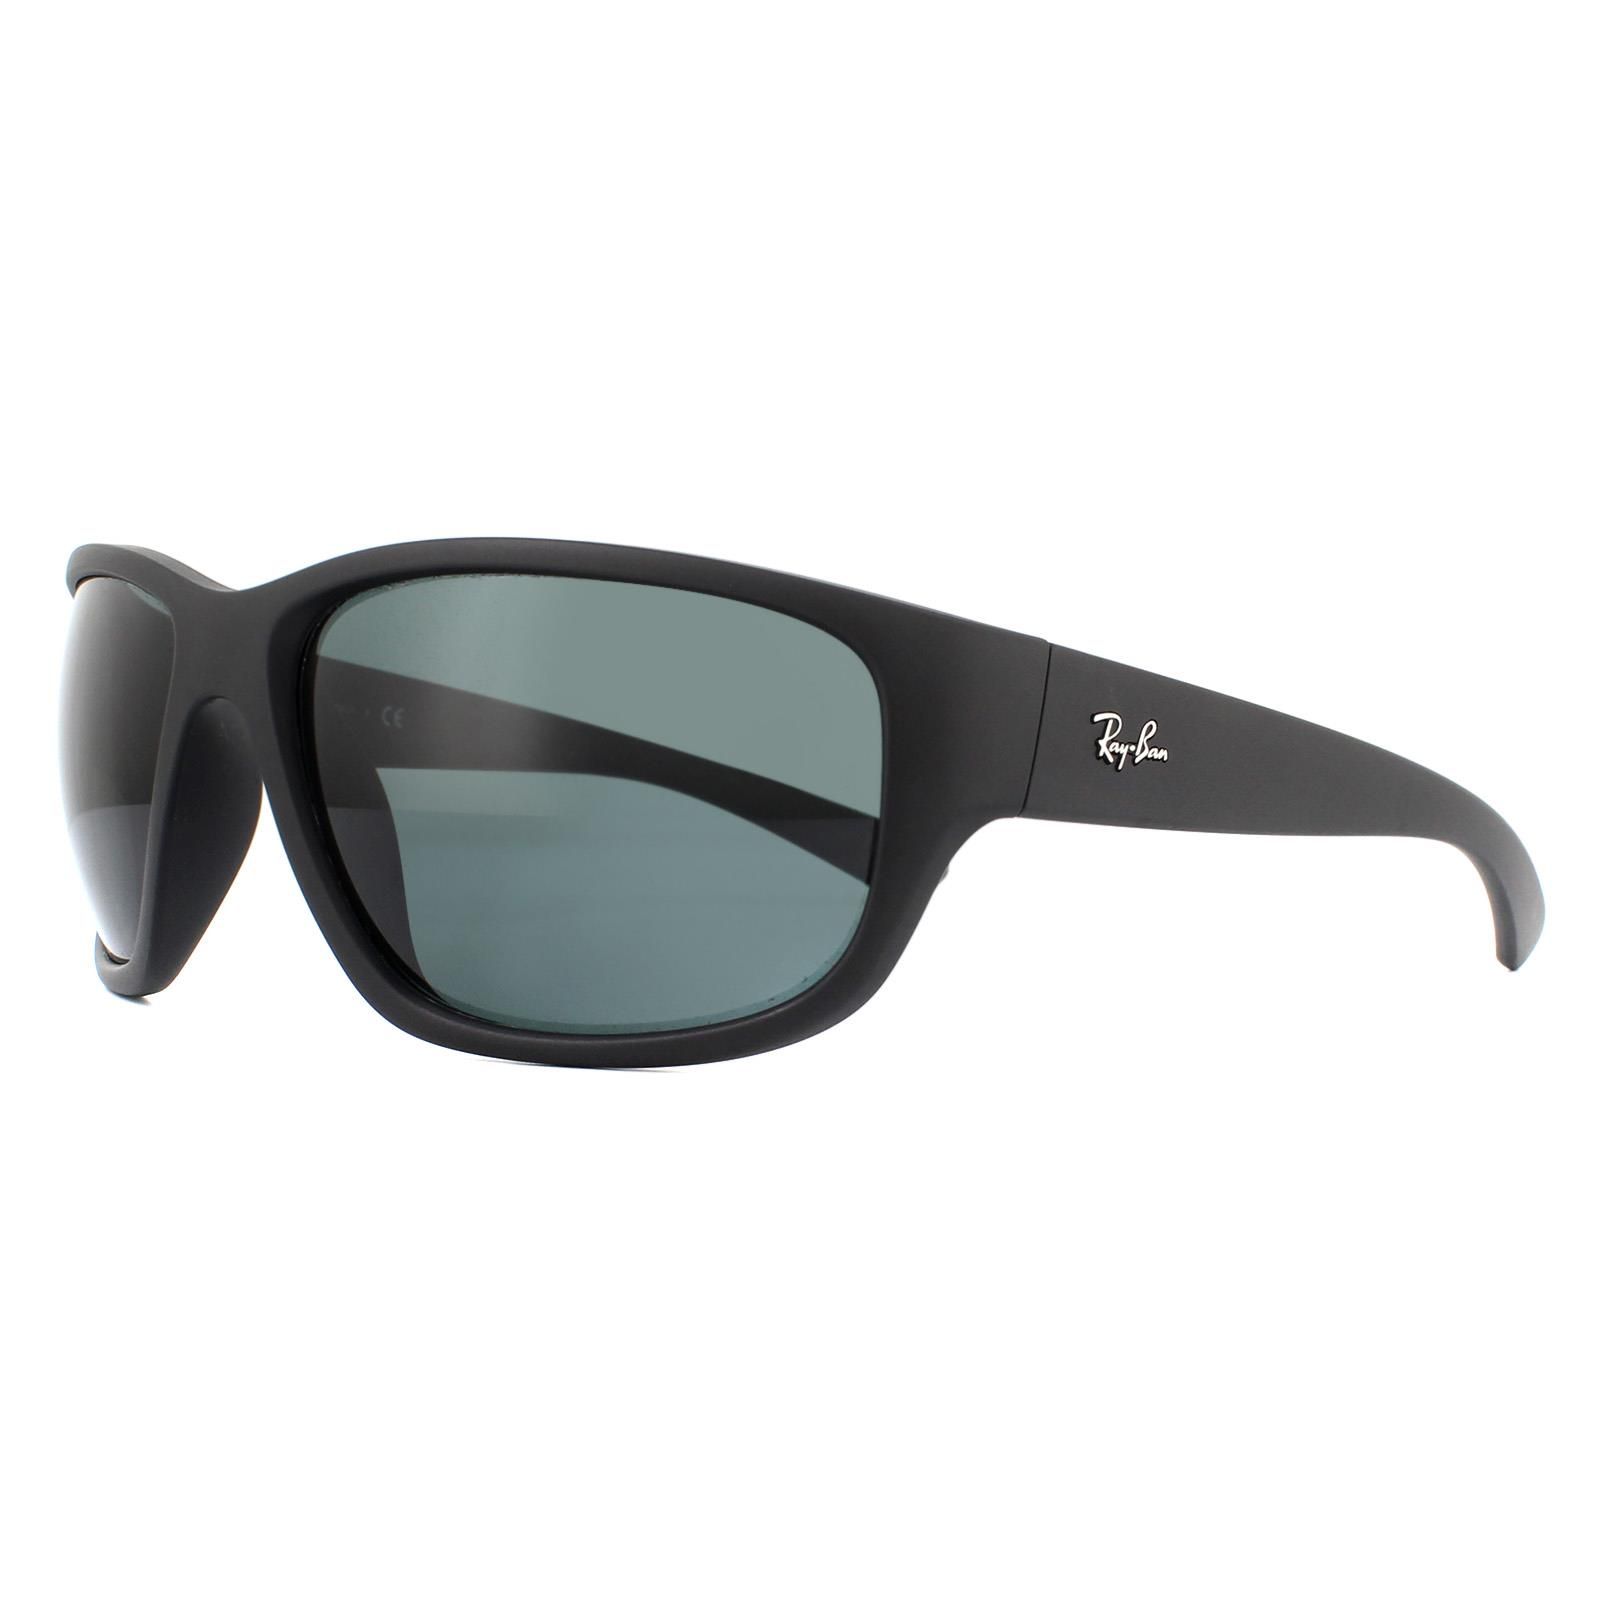 Ray-Ban Sunglasses 4300 601SR5 Black Blue Grey Classic has a large wrap around frame with a bold profile. The nylon frame is super lightweight and comfortable and the large lenses will guarantee maximum protection and vision. The Ray-Ban logo embellishes the temples and the RB etching on the lens ensures authenticity.